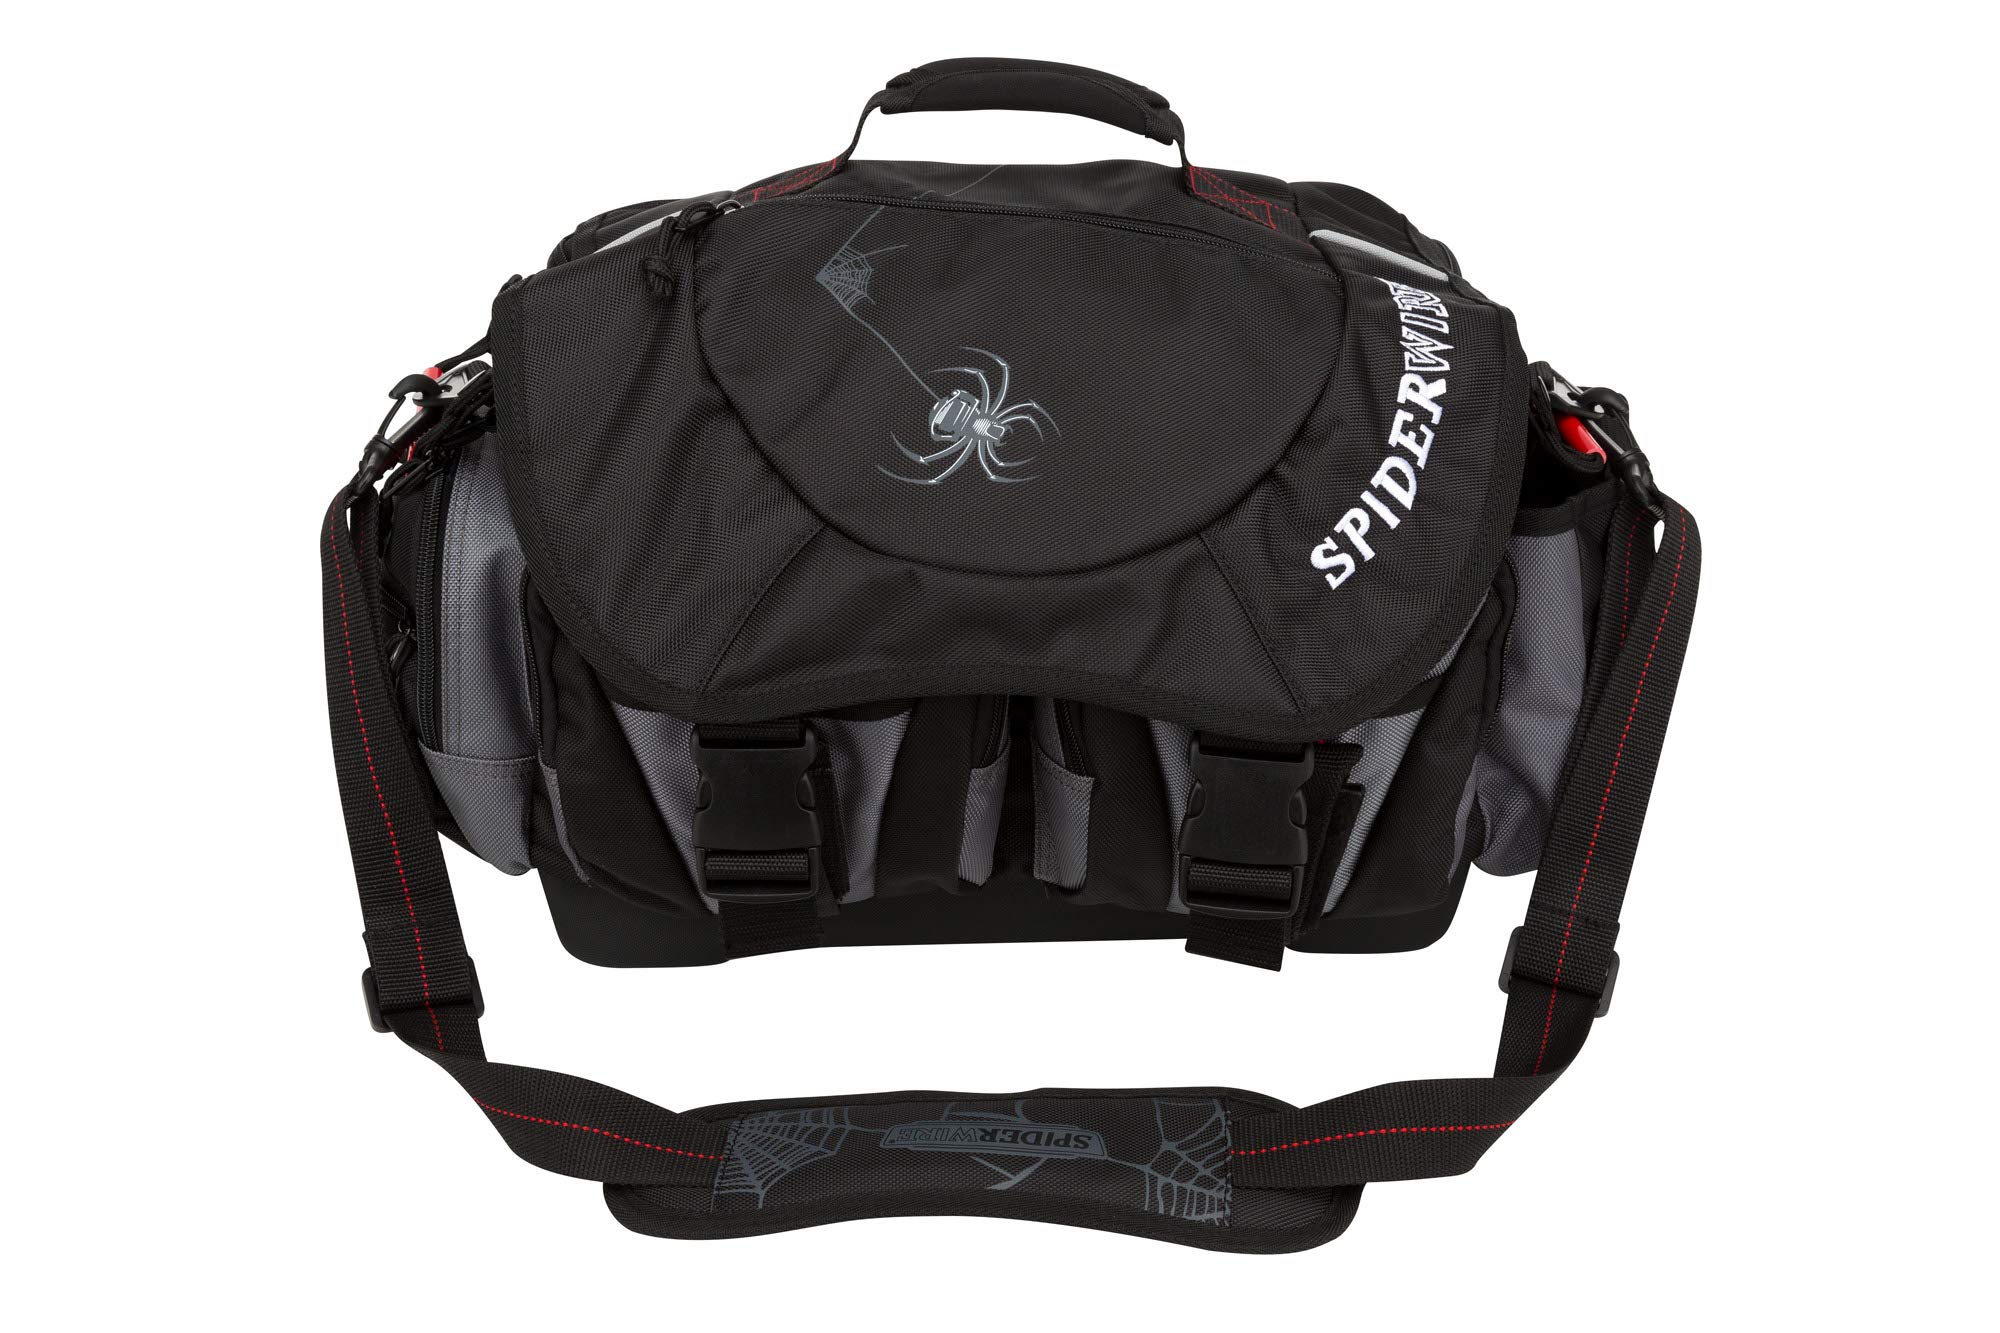 Bass Pro Shops Extreme Series 3600 Tackle Bag